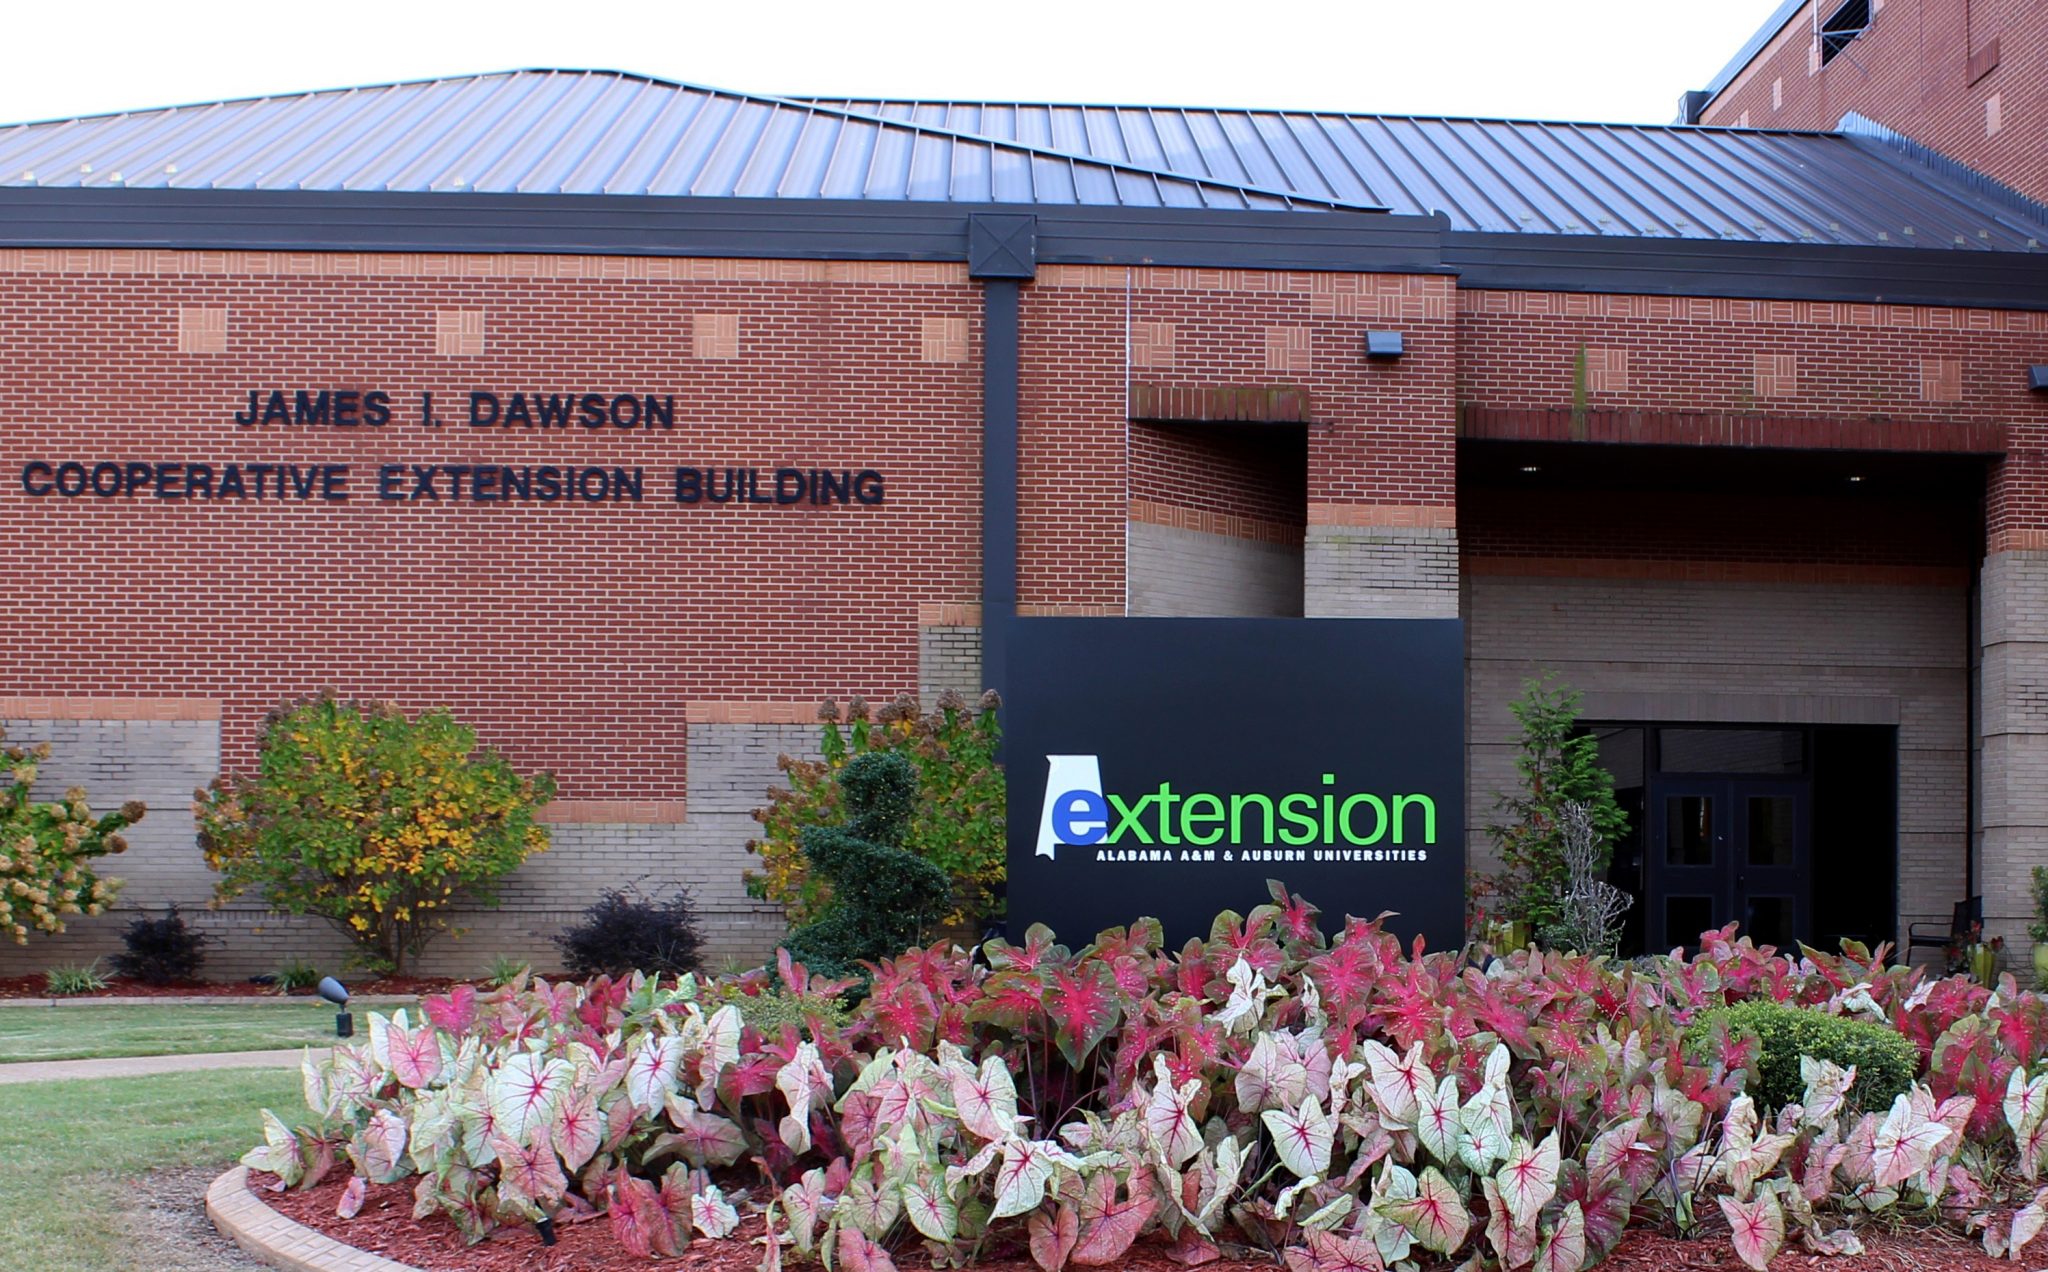 Exterior of the Dawson building with Extension sign in front